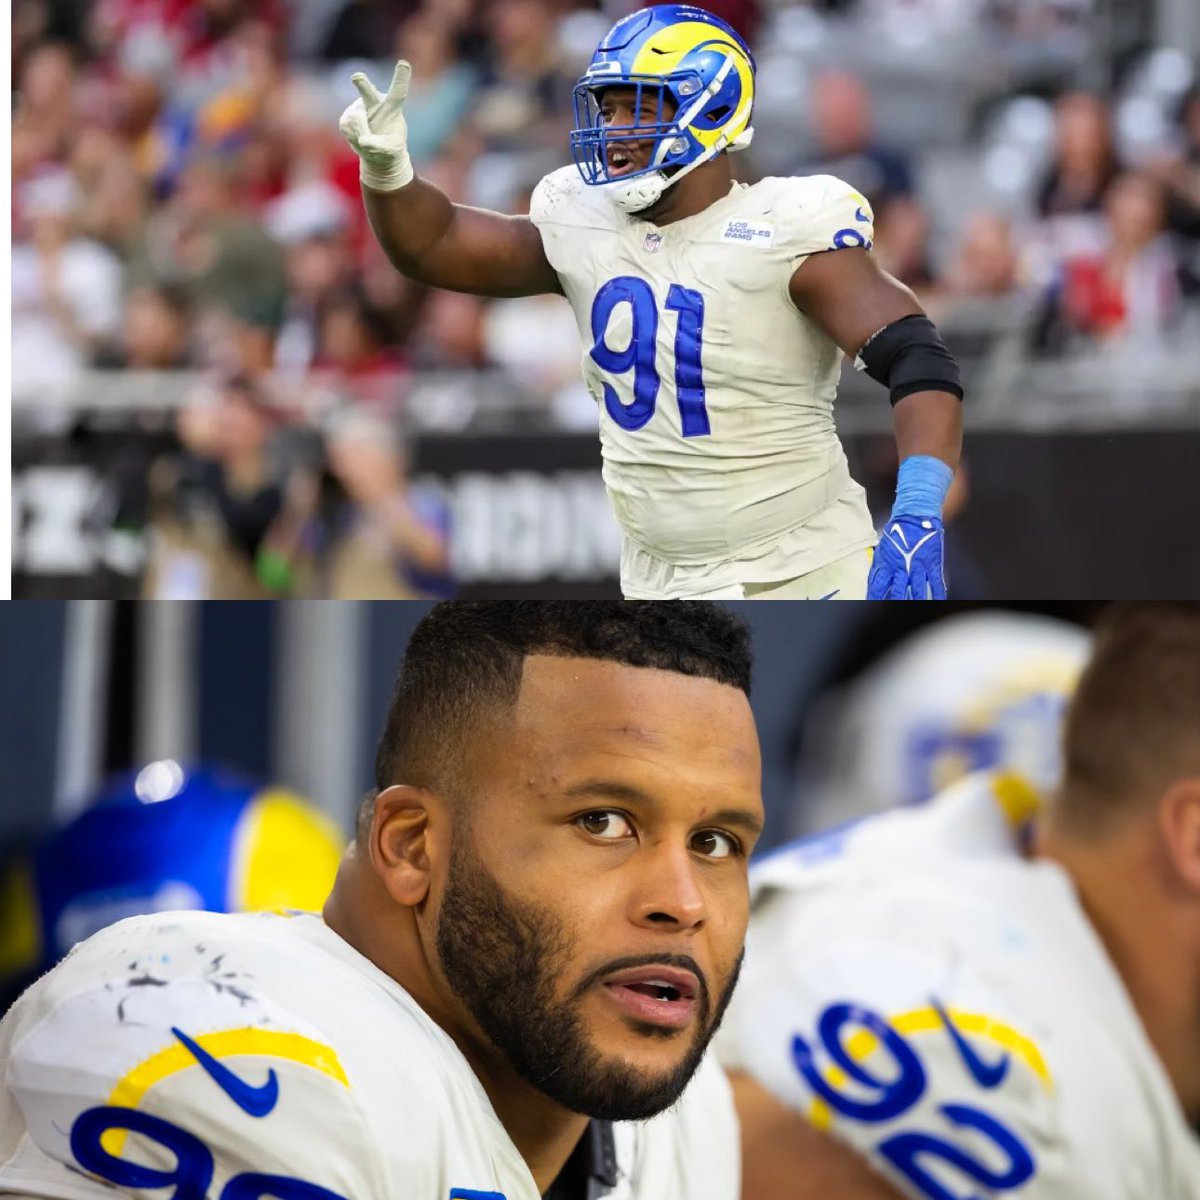 Kobie Turner has been on 🔥this season! He is currently tied with Aaron Donald’s rookie team record for sacks with 9. Kobie has a chance to break the record this Sunday against the 49ers 🤯